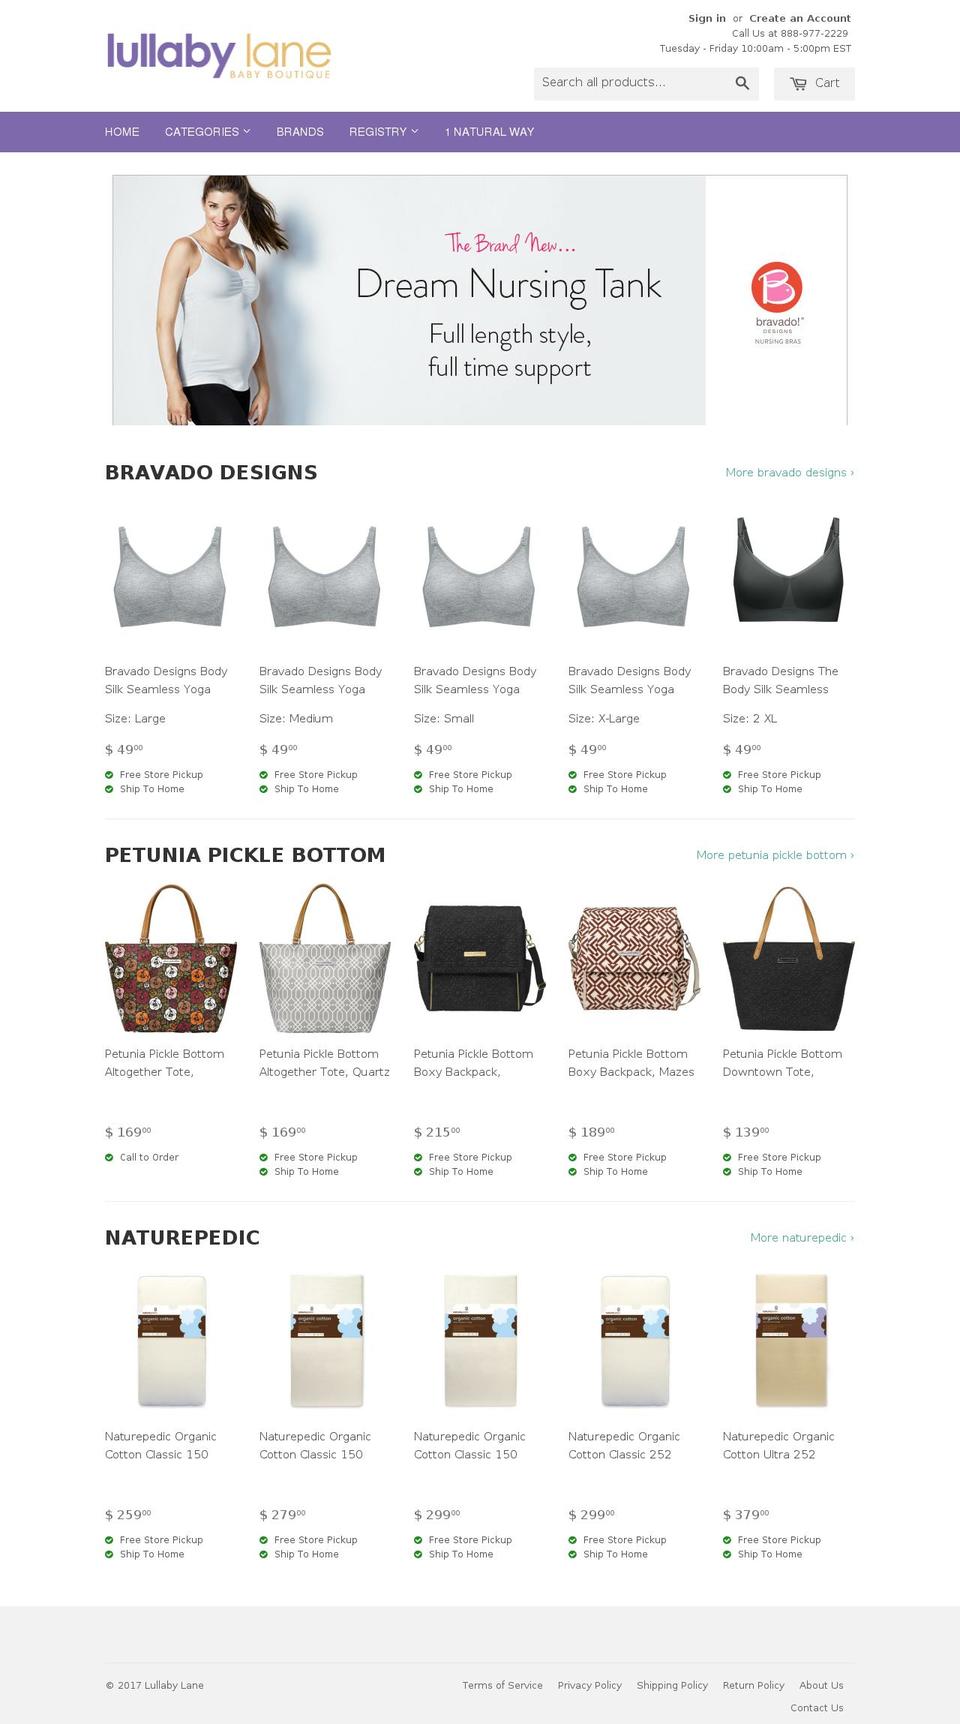 COLORBLOCK Shopify theme site example lullabylane.com